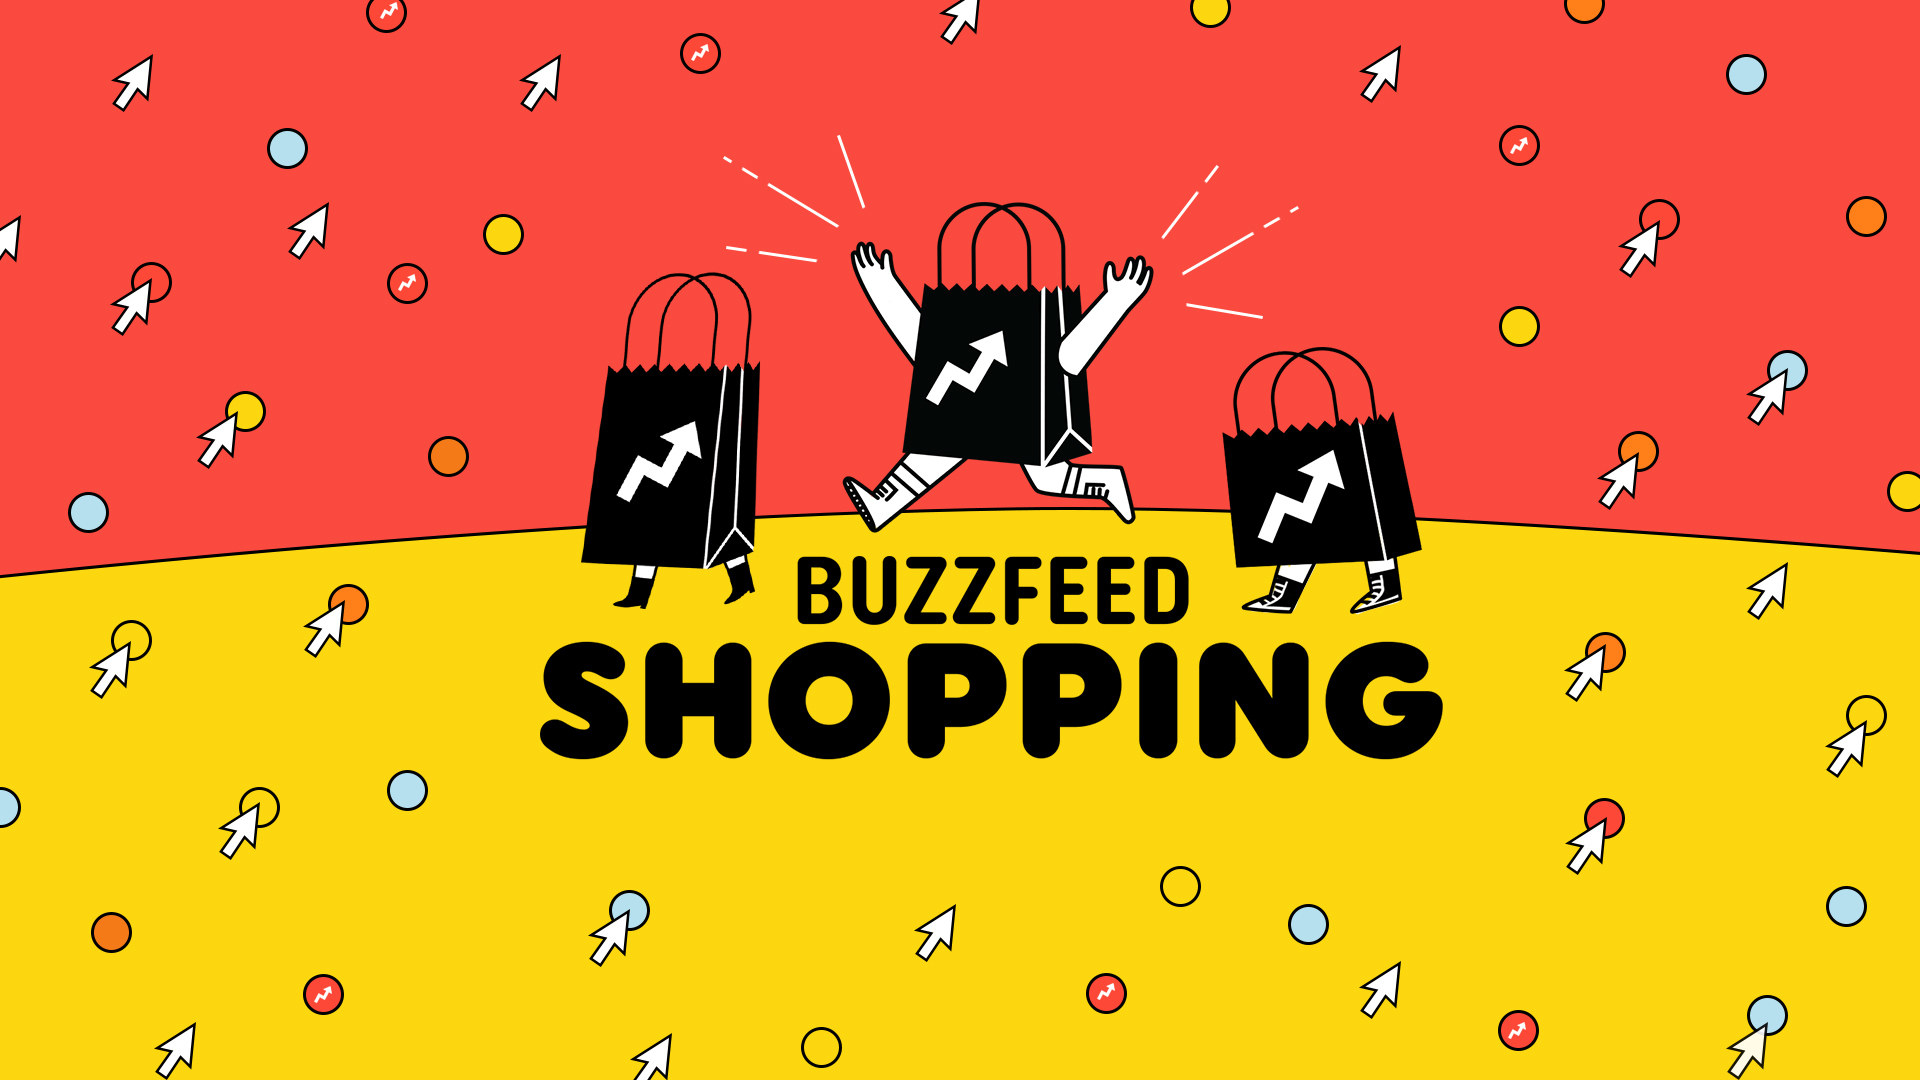 The BuzzFeed Shopping logo featuring illustrations of dancing handbags